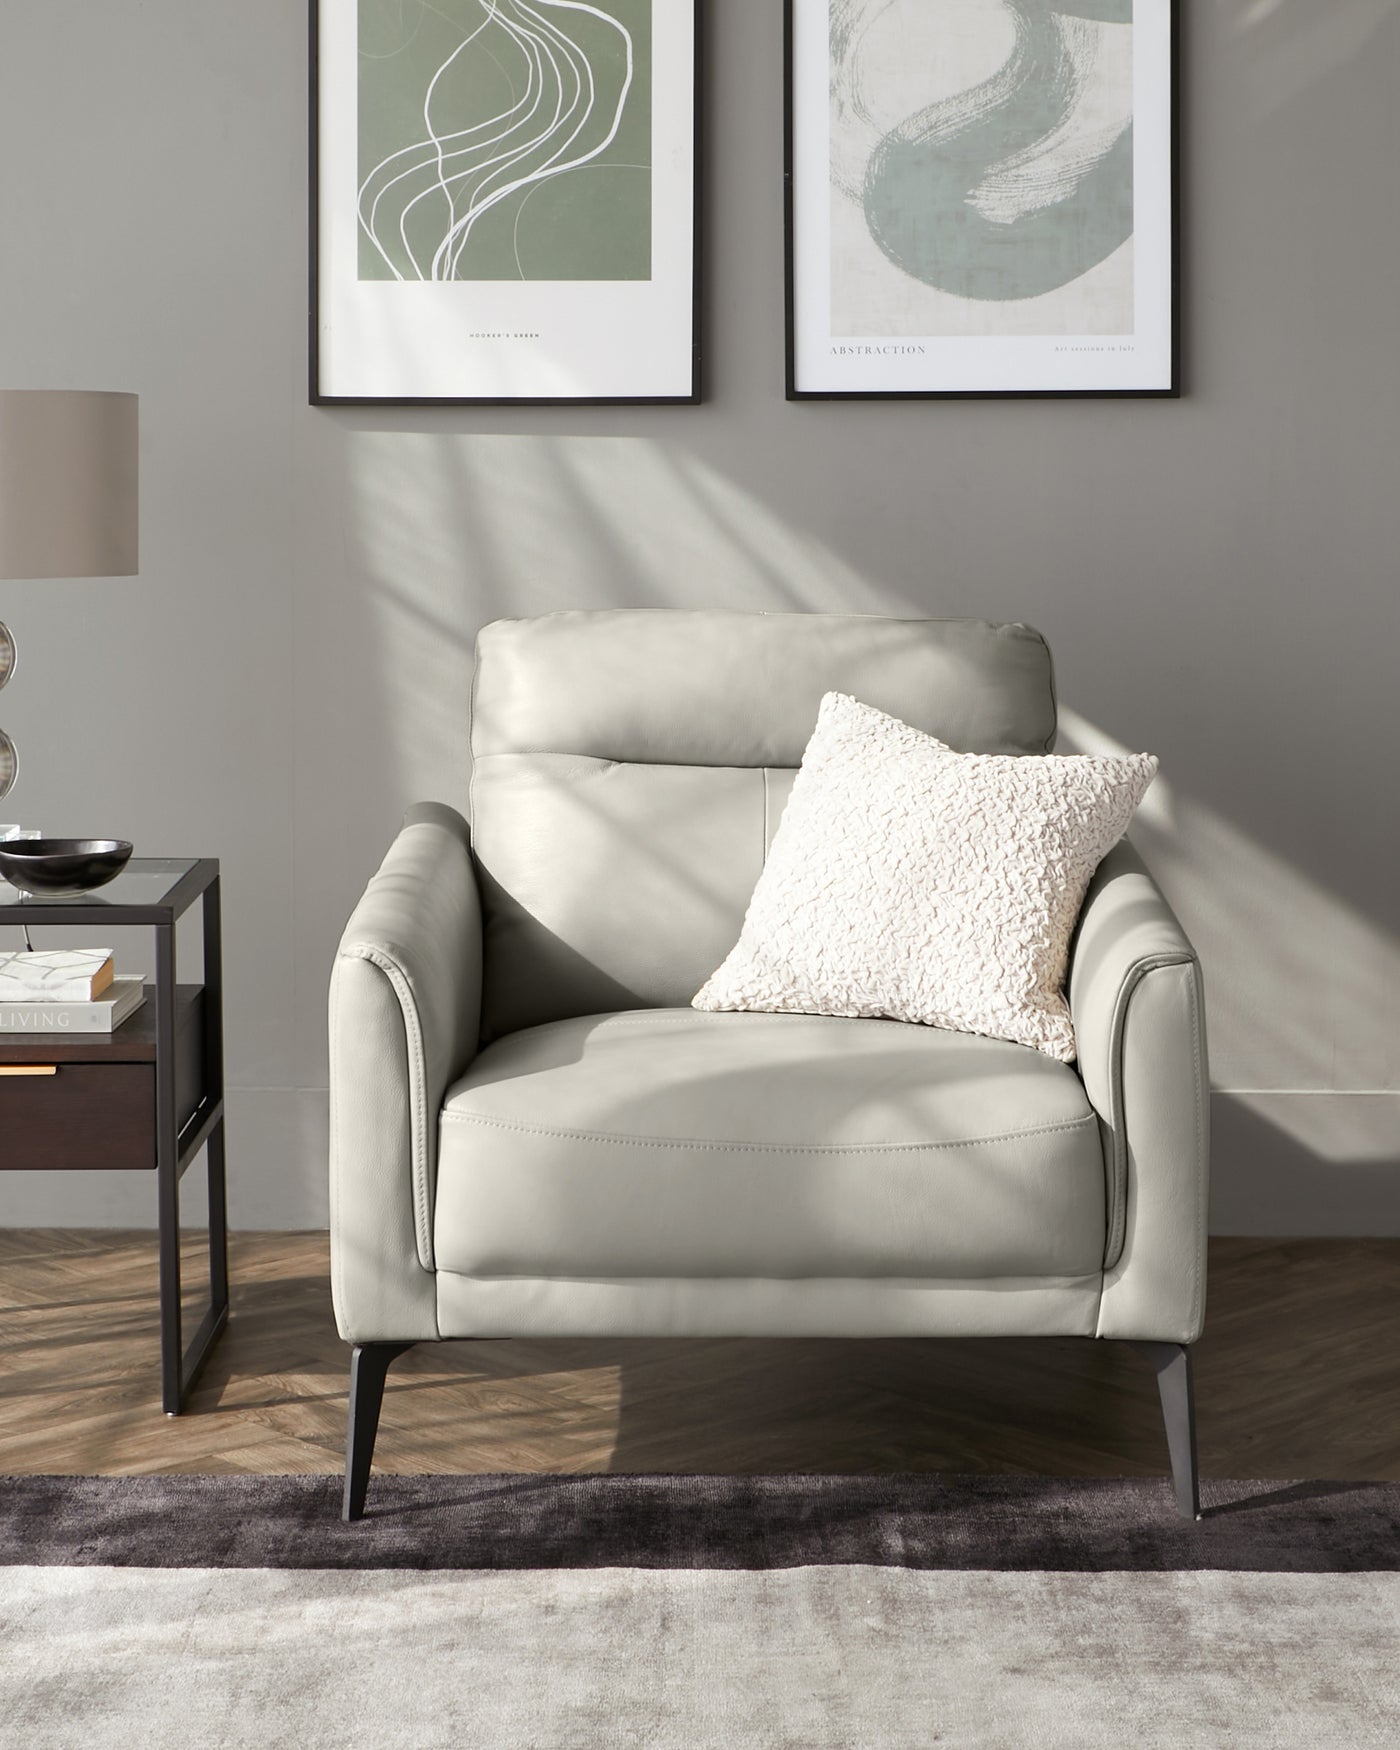 Modern light grey leather armchair with sleek lines and black metal legs, accompanied by a textured white throw pillow. Beside it, a contemporary black side table with geometric lines and a matte surface, topped with a bowl decor. The setting includes abstract wall art, a floor lamp, and a plush area rug over herringbone wood flooring.